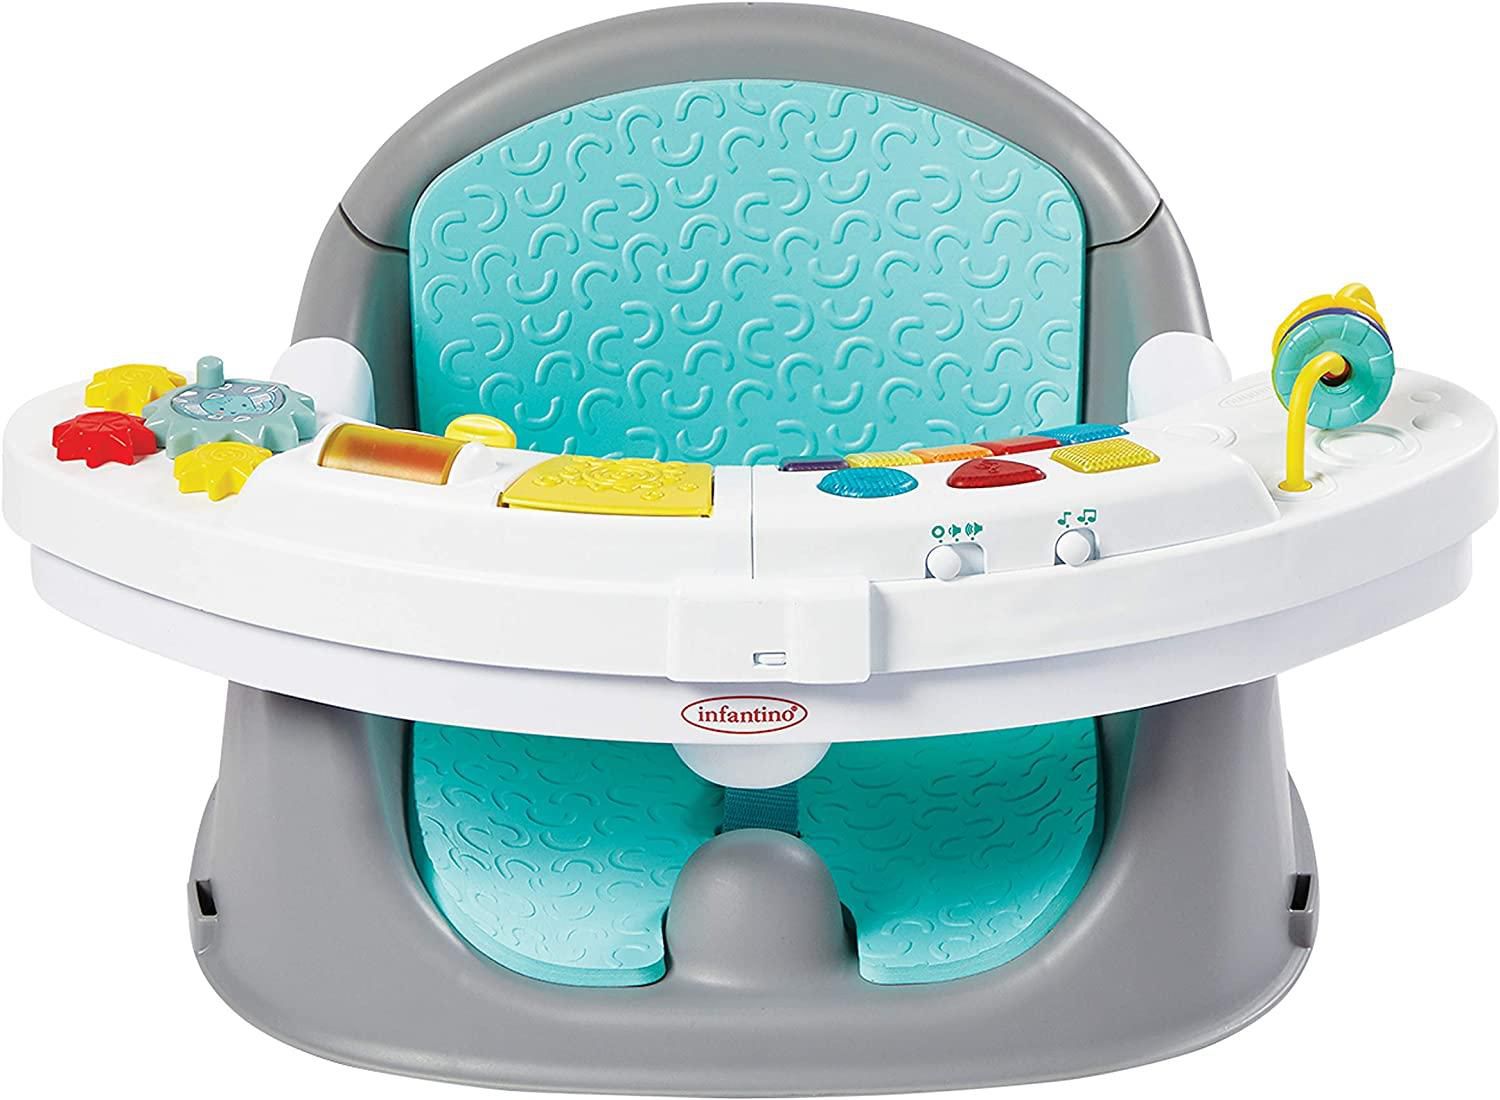 Infantino Music&Lights 3-In-1 Discovery Seat & Booster|Activity|Feeding|Interactive Music|Baby/ Child Learning & Development|